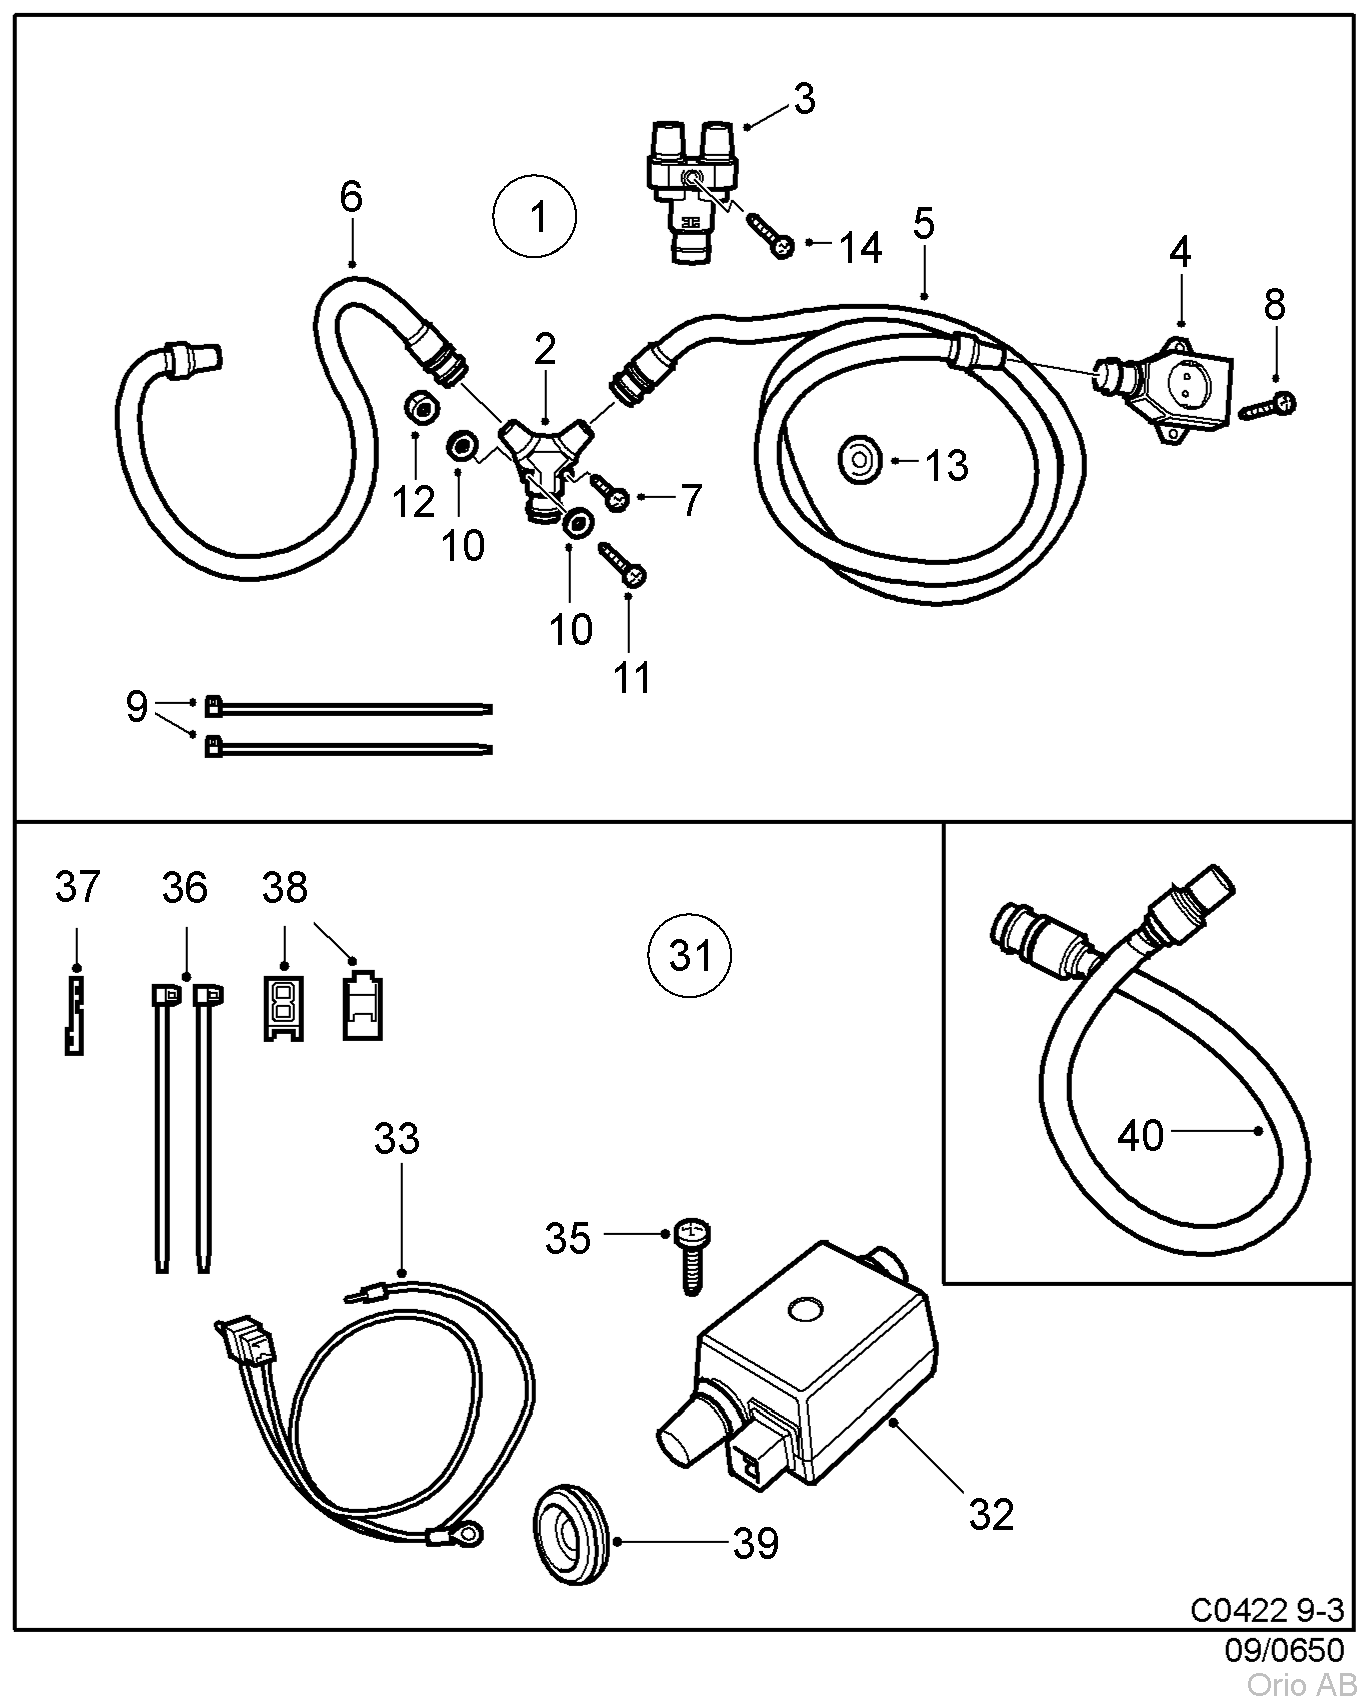 Climate control - Branching cable kit (1998 - 2003)